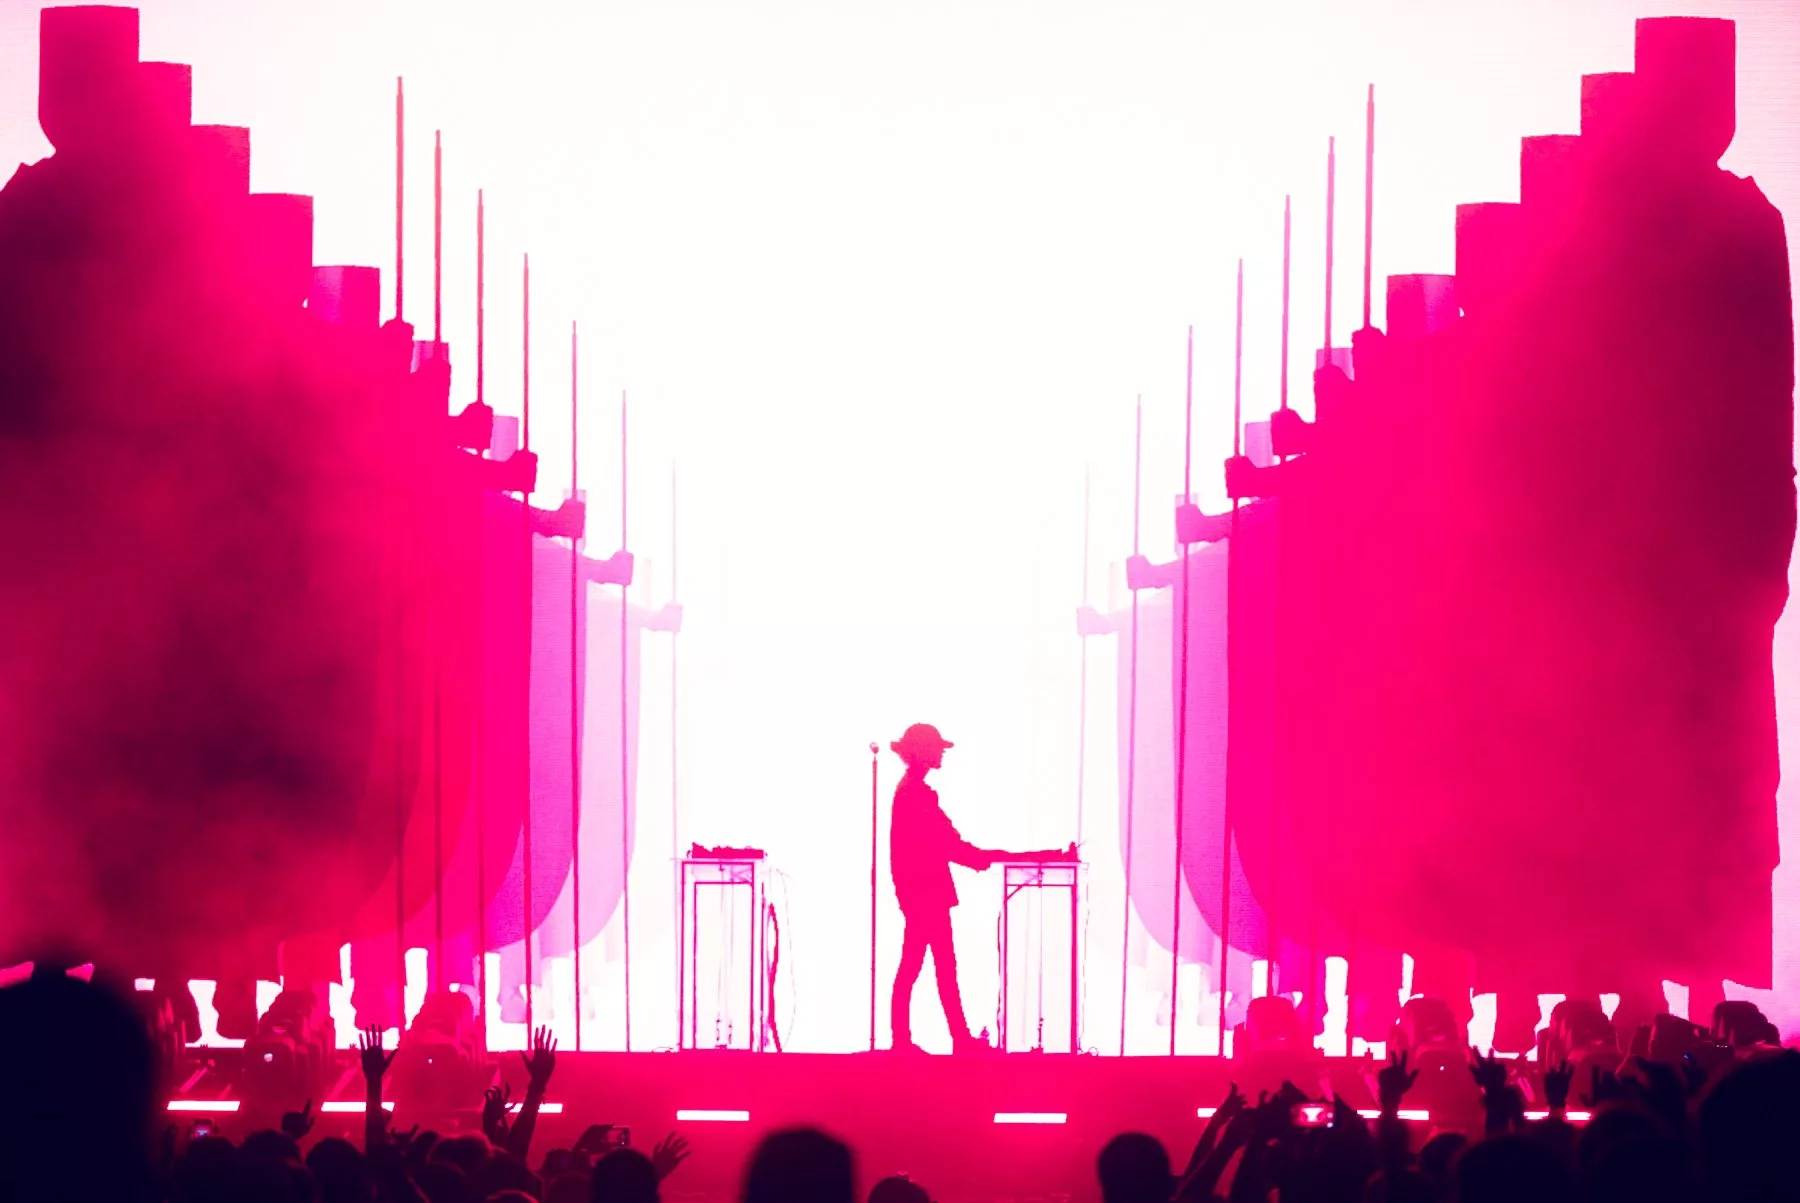 Madeon’s ‘Good Faith Forever’ set to electrify Red Rocks